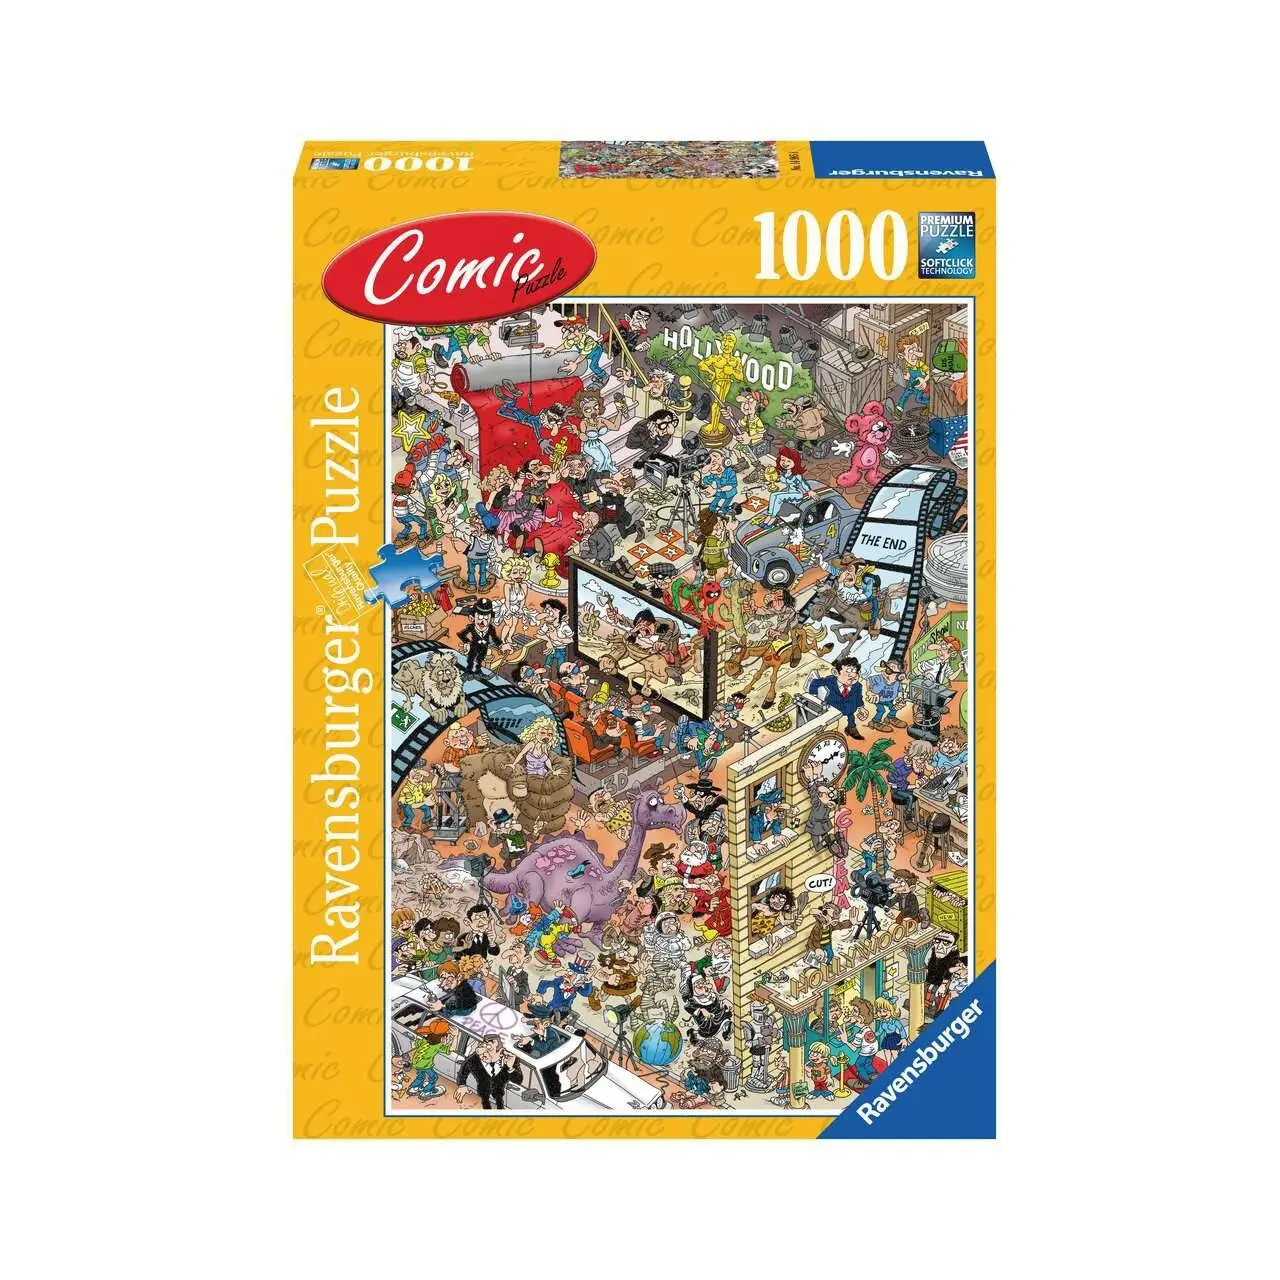 Puzzle ComicPuzzle Hollywood 1000